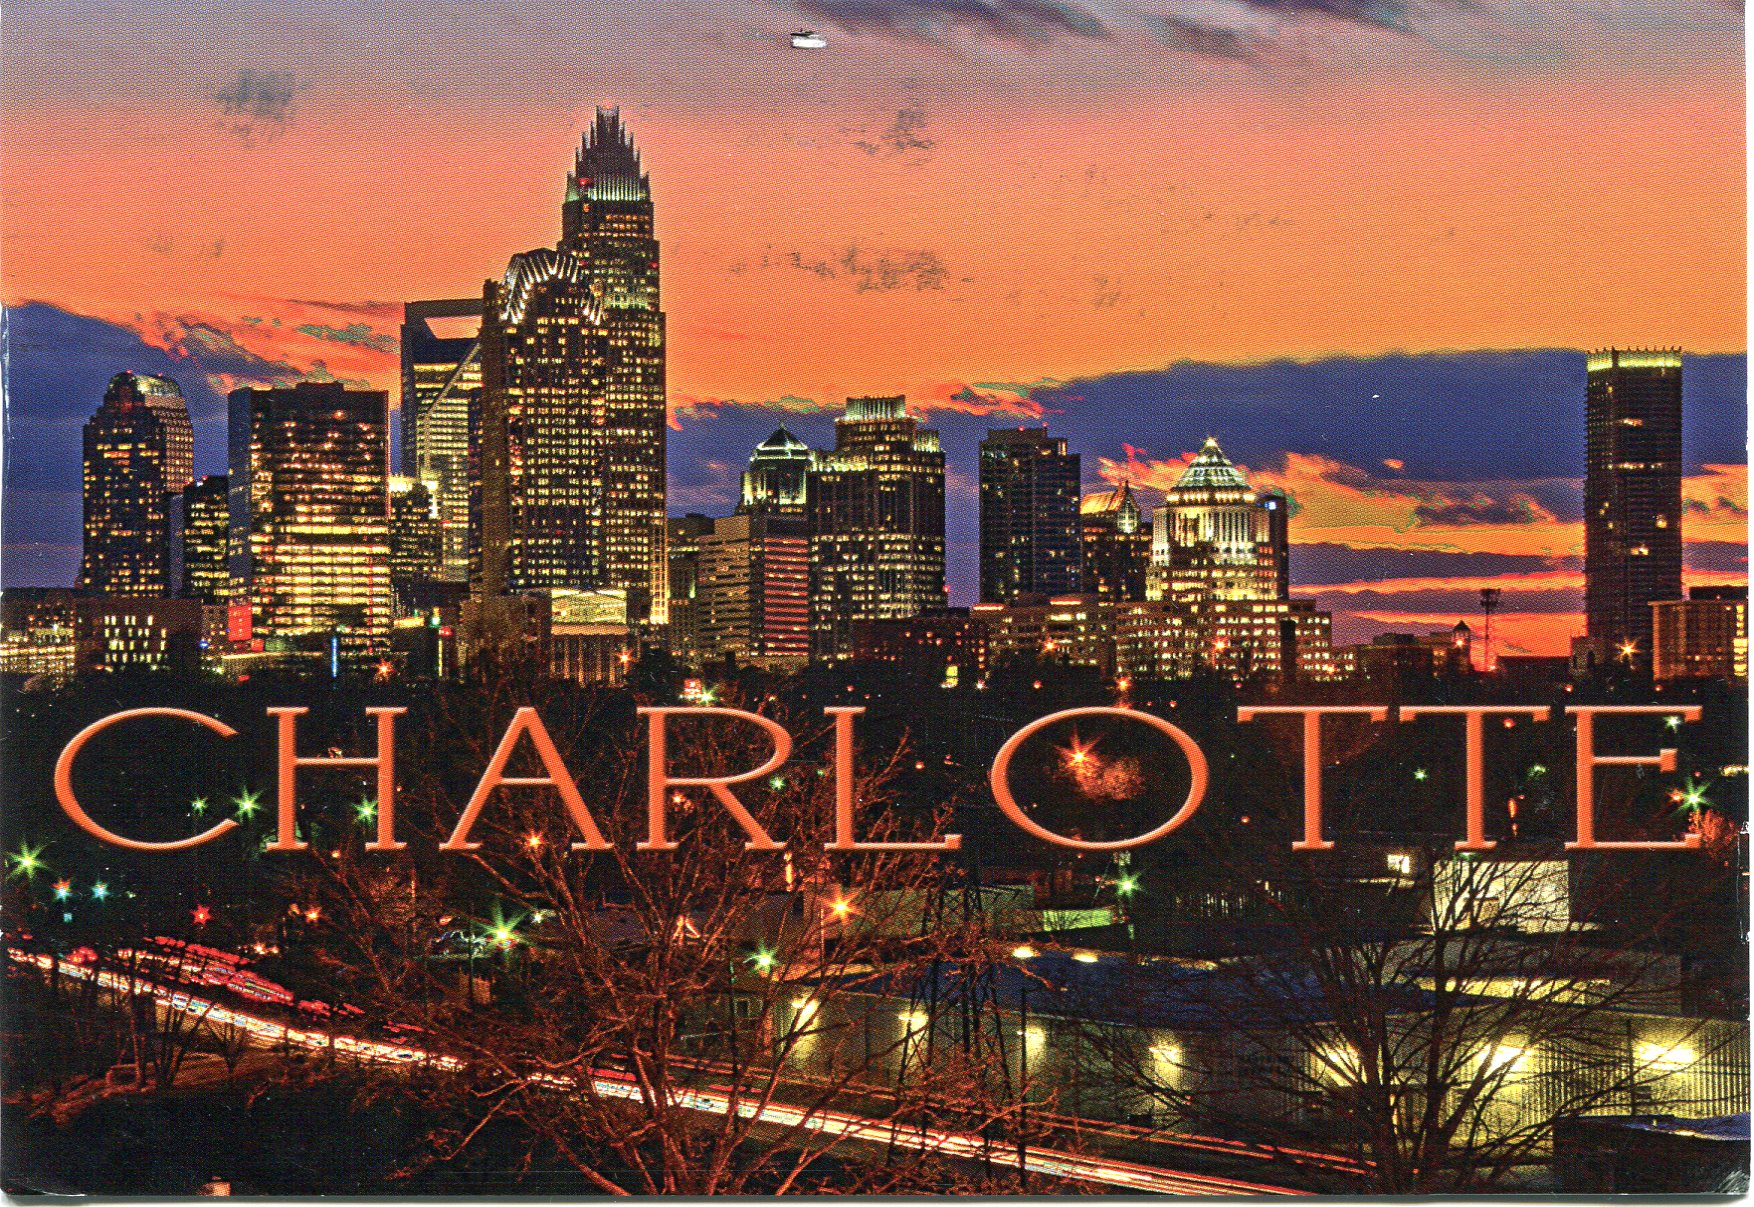 Charlotte, North Carolina | Remembering Letters and Postcards